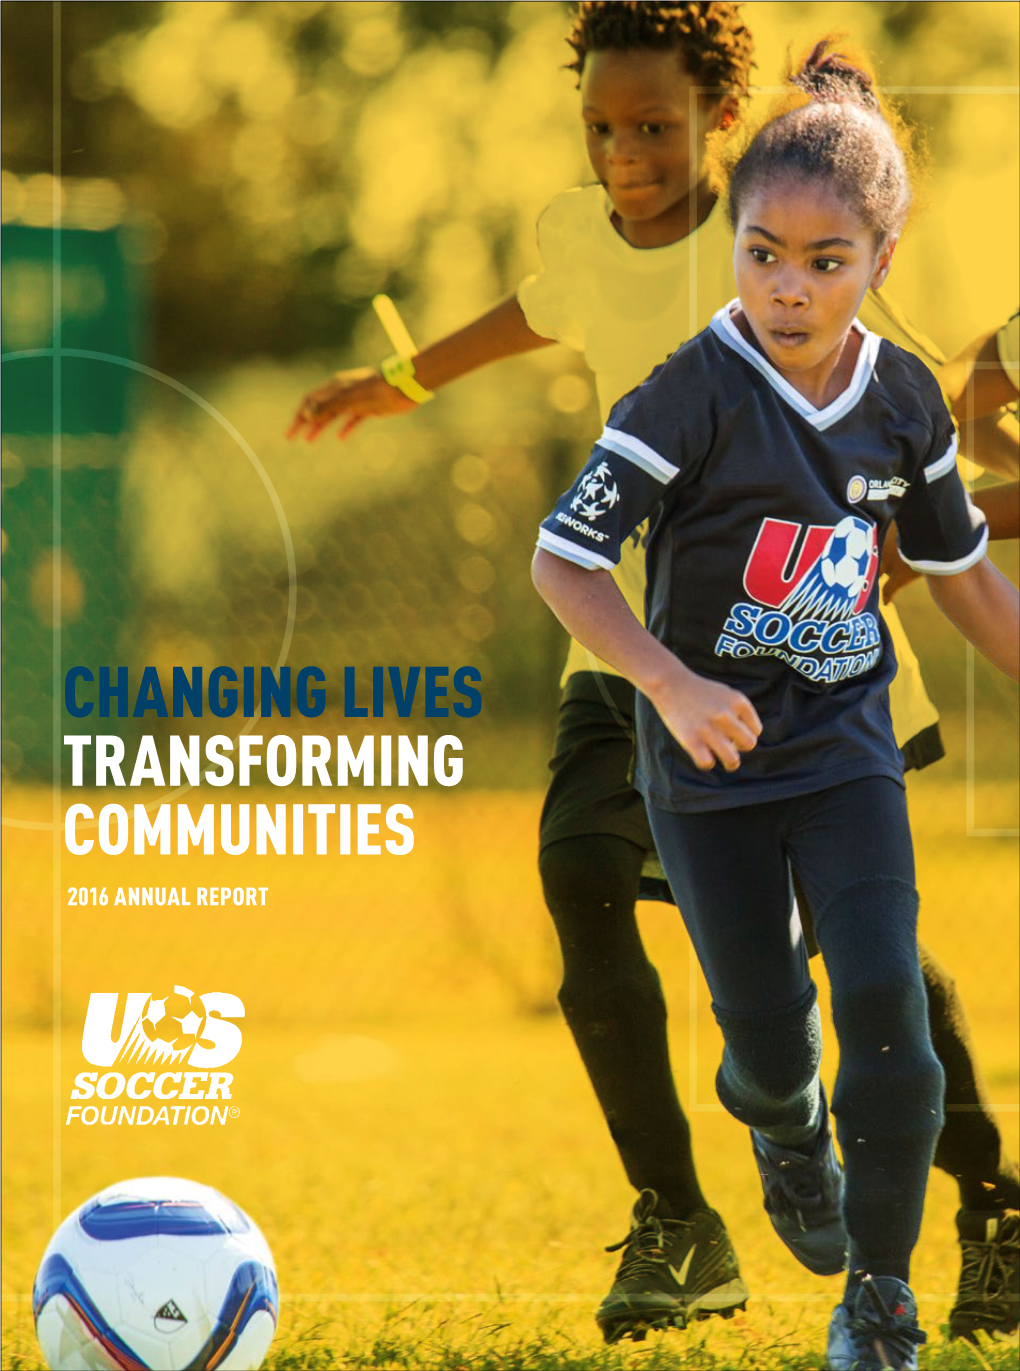 Changing Lives Transforming Communities 2016 Annual Report